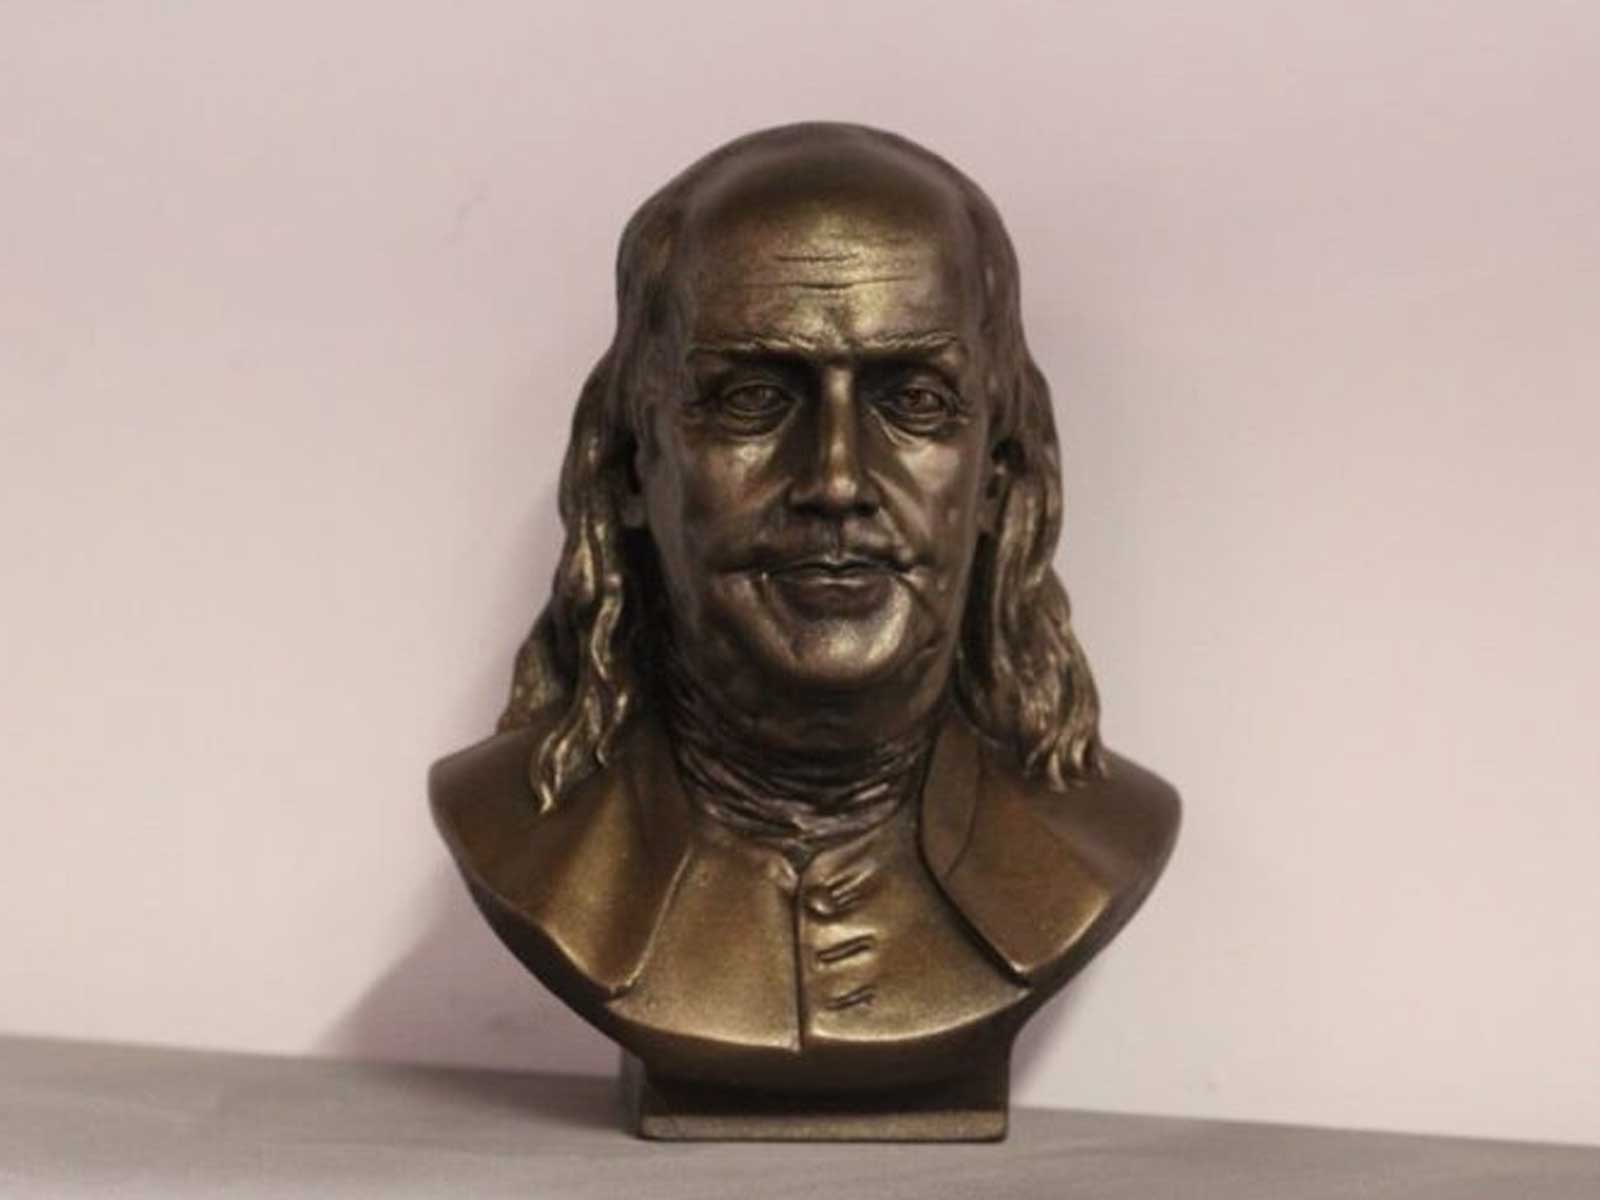 The Symbolism and Importance of the Benjamin Franklin Bust